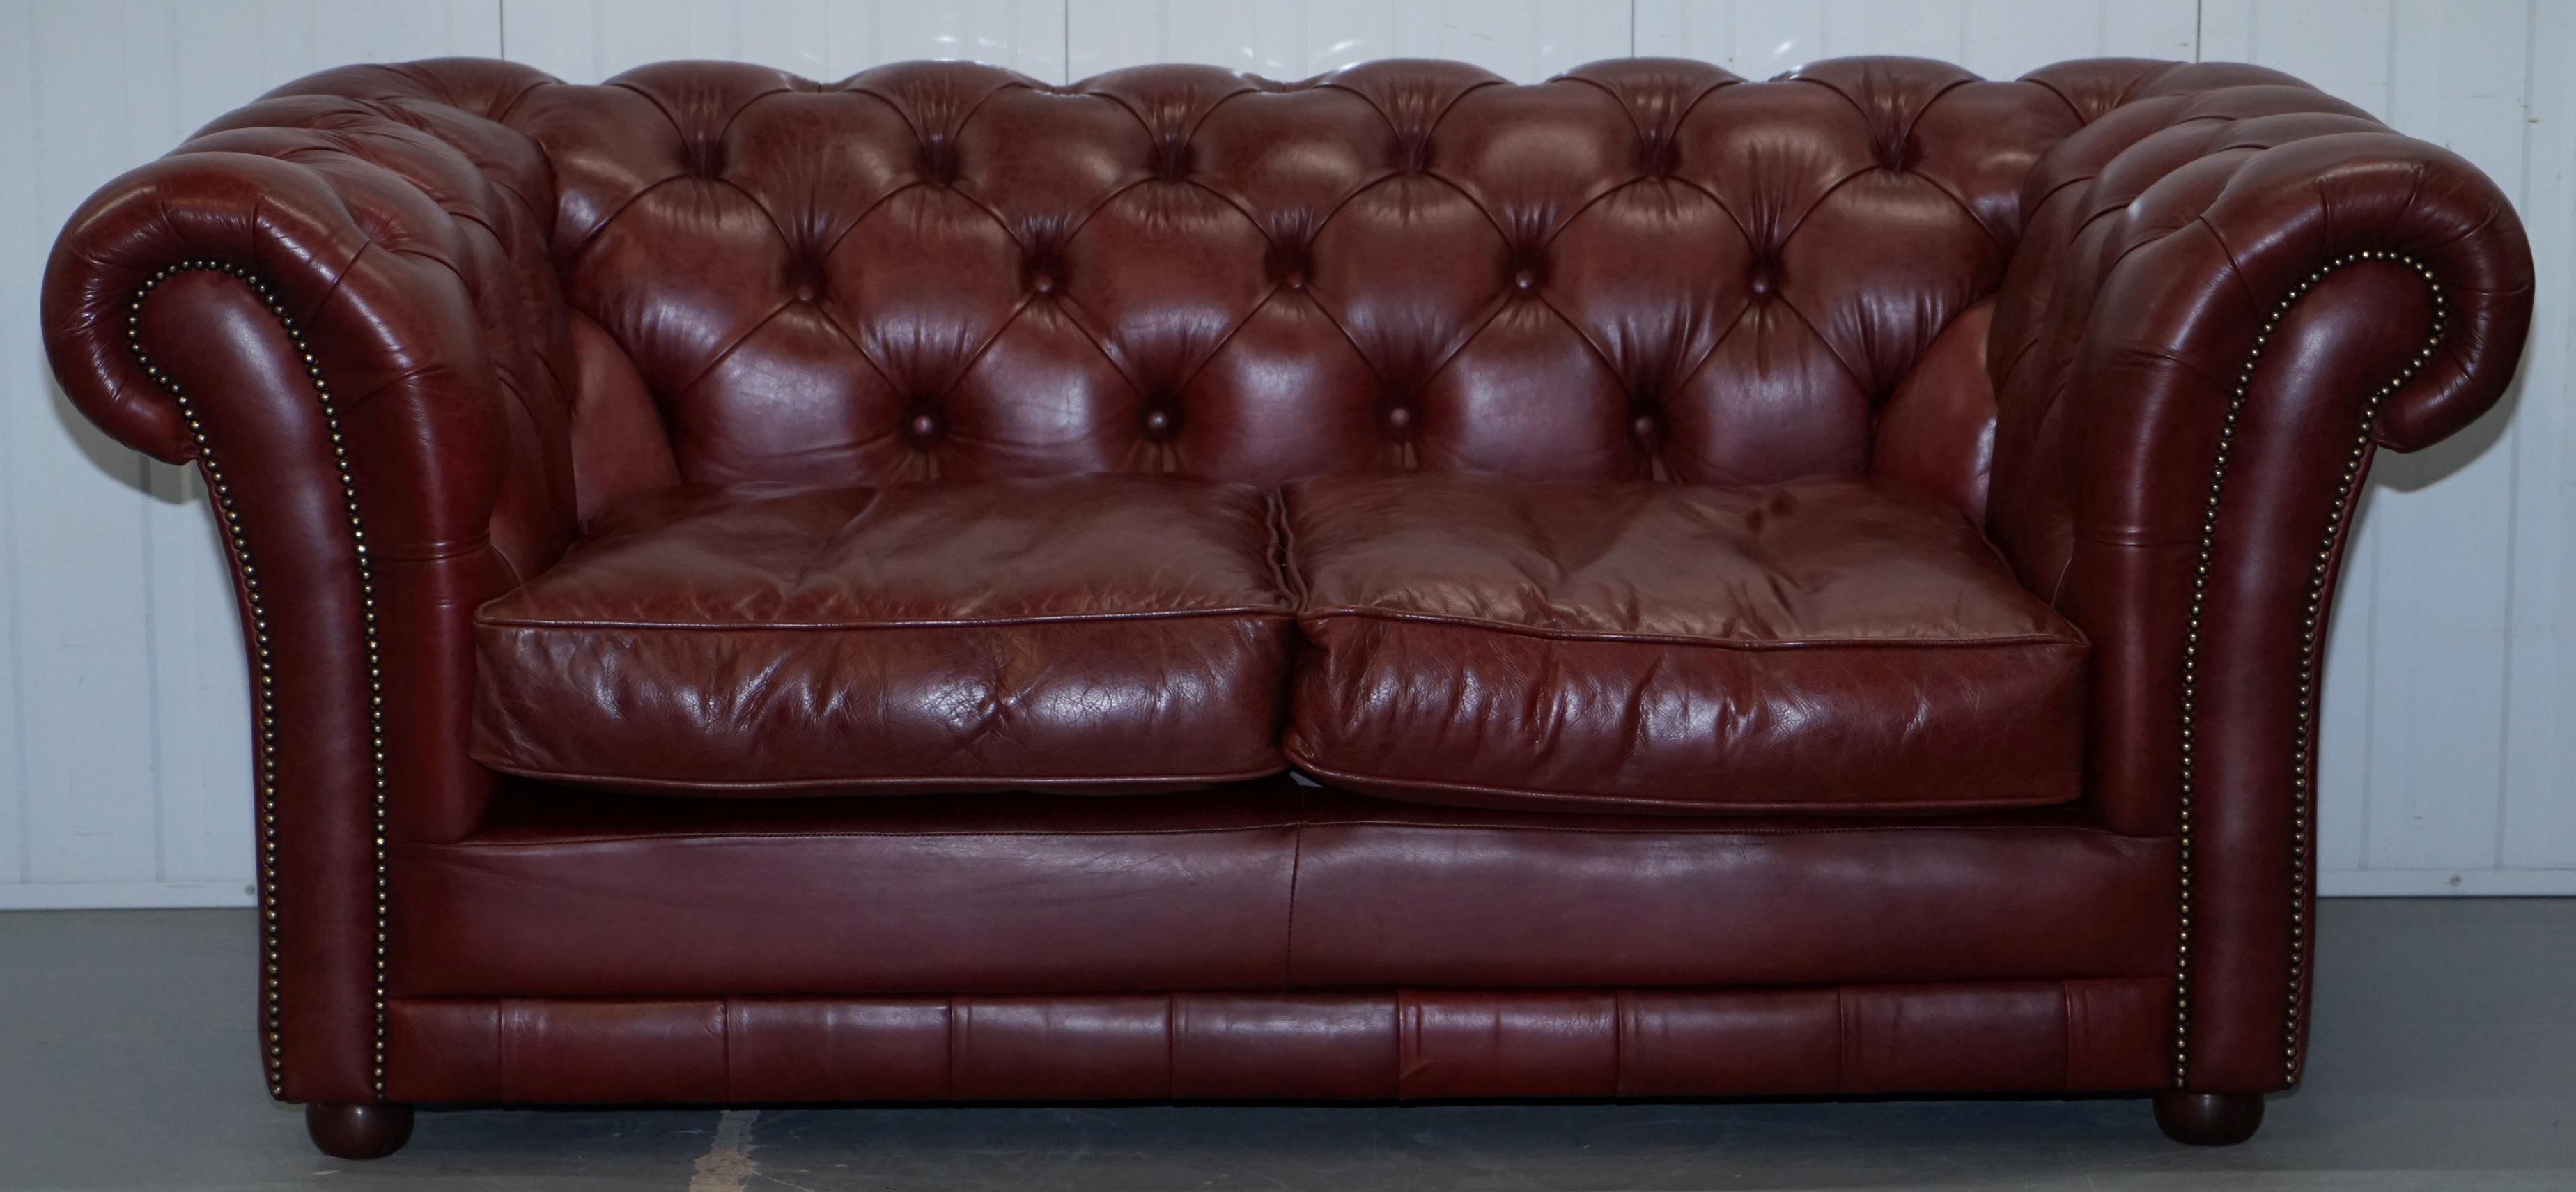 We are delighted to offer for sale this lovely reddish brown Tetrad Faded Glory hand made in England Chesterfield club sofa RRP £2699

The sofa is very comfortable, it has oversized arms and cushions and is allot easier to live with than a